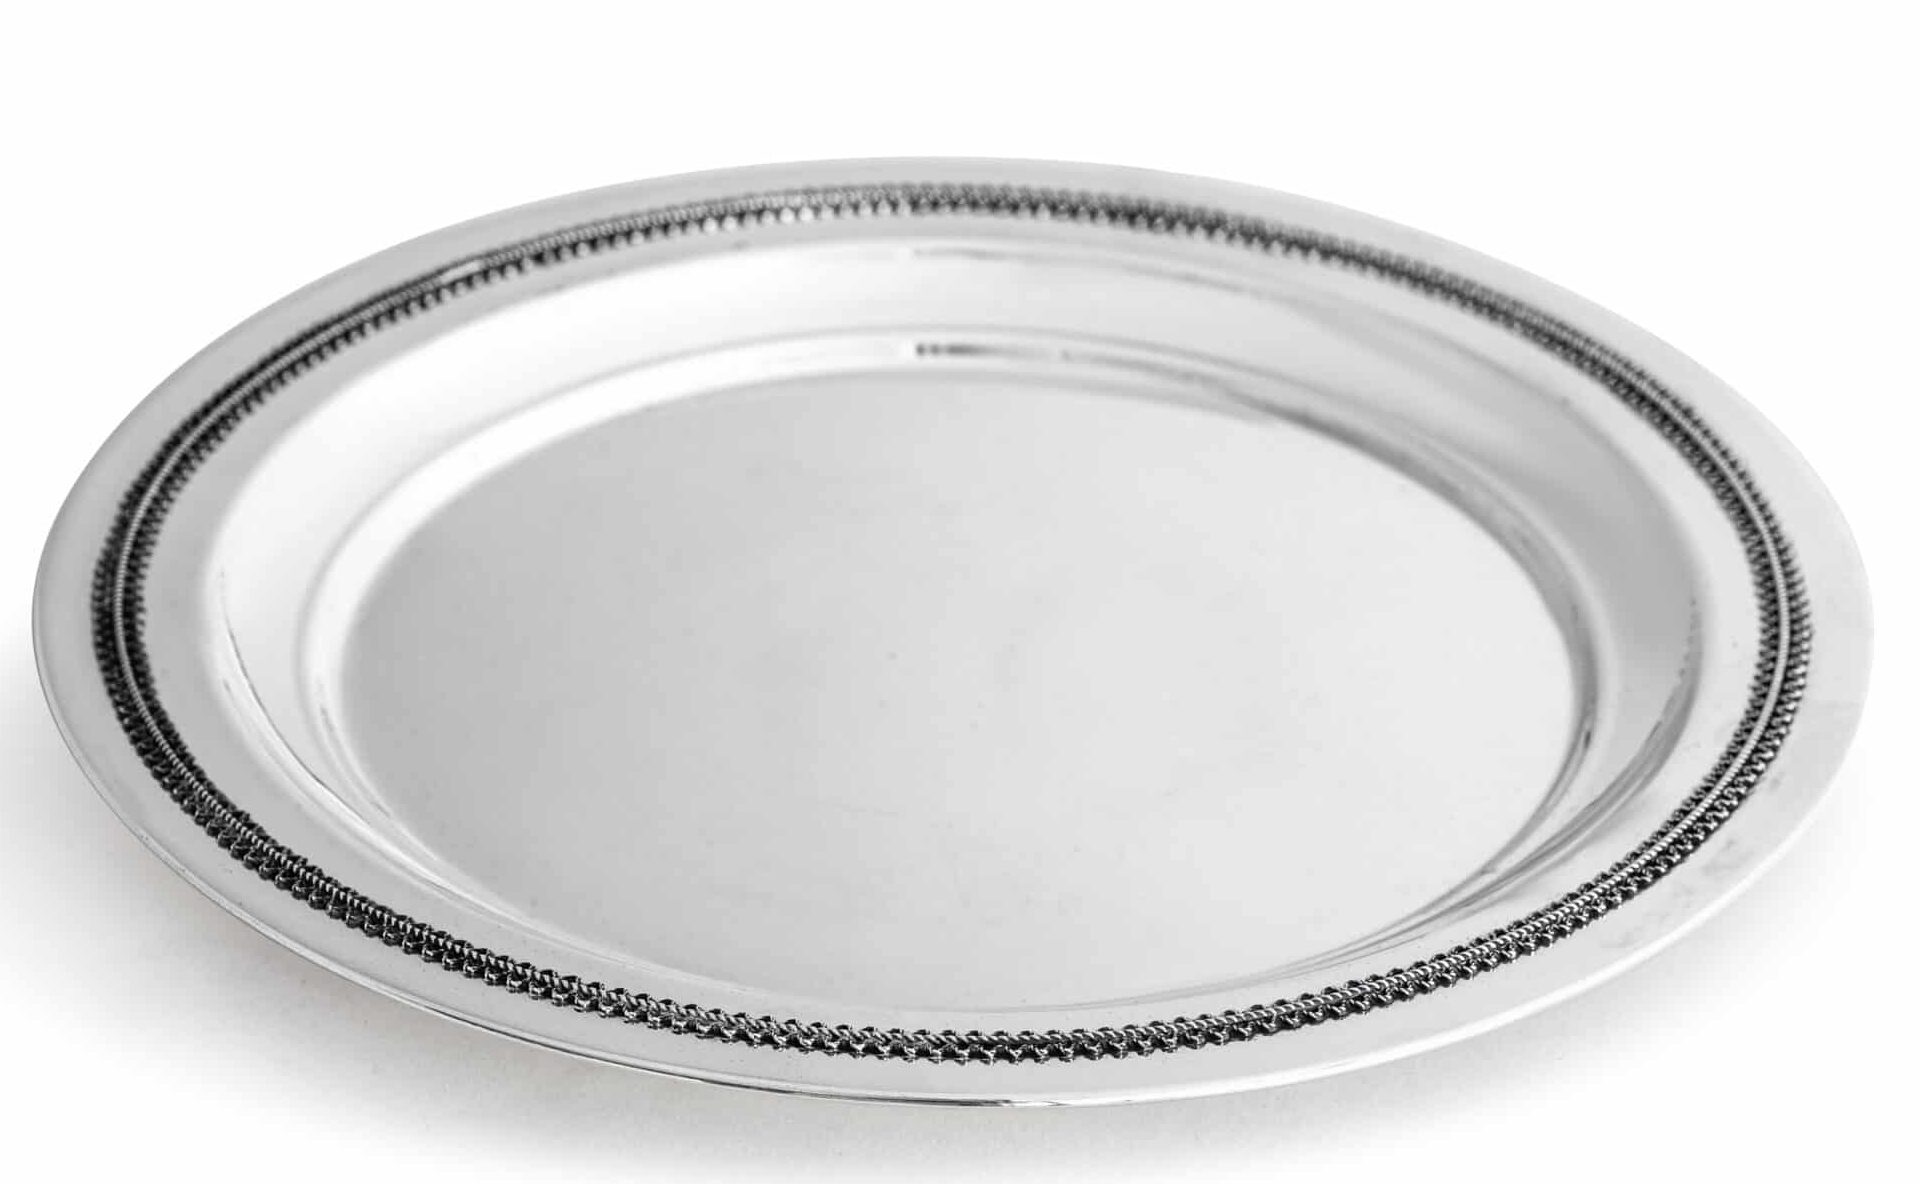 Classic Silver Plate for Kiddush with Filigree Rim